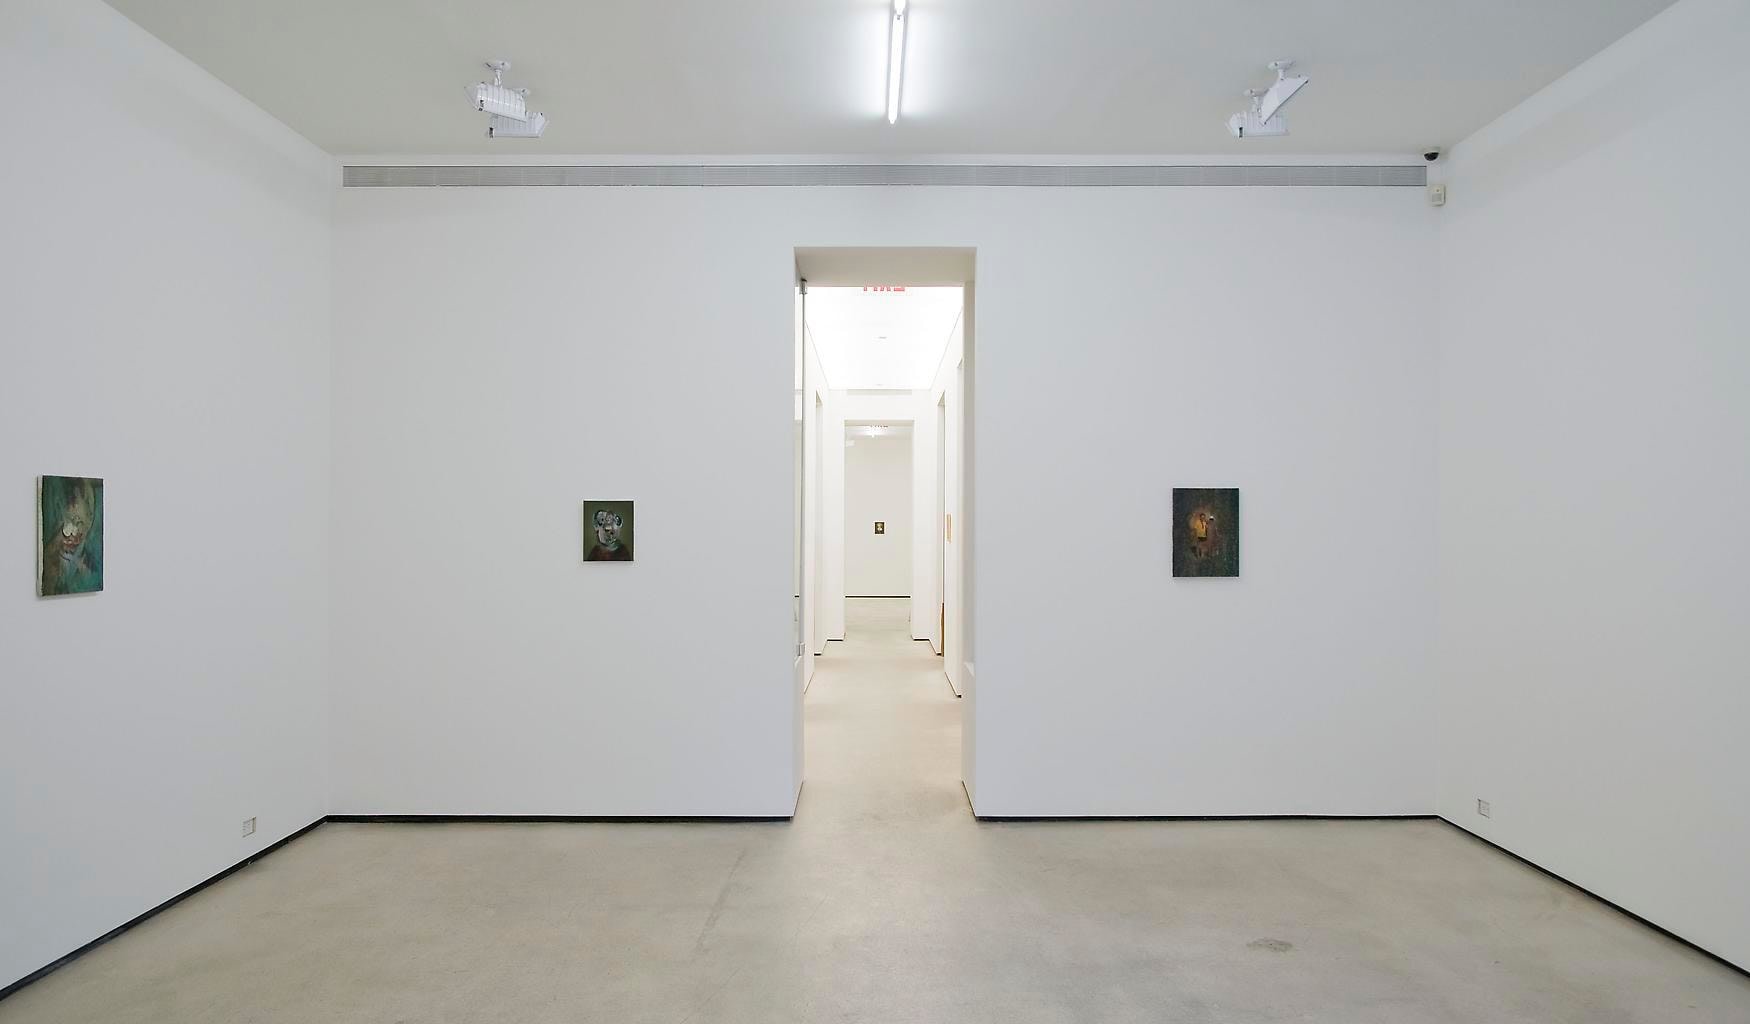  Installation view, Ross Chisholm, Garden of Forking Paths, Marc Jancou, New York, September 8 - October 22, 2011